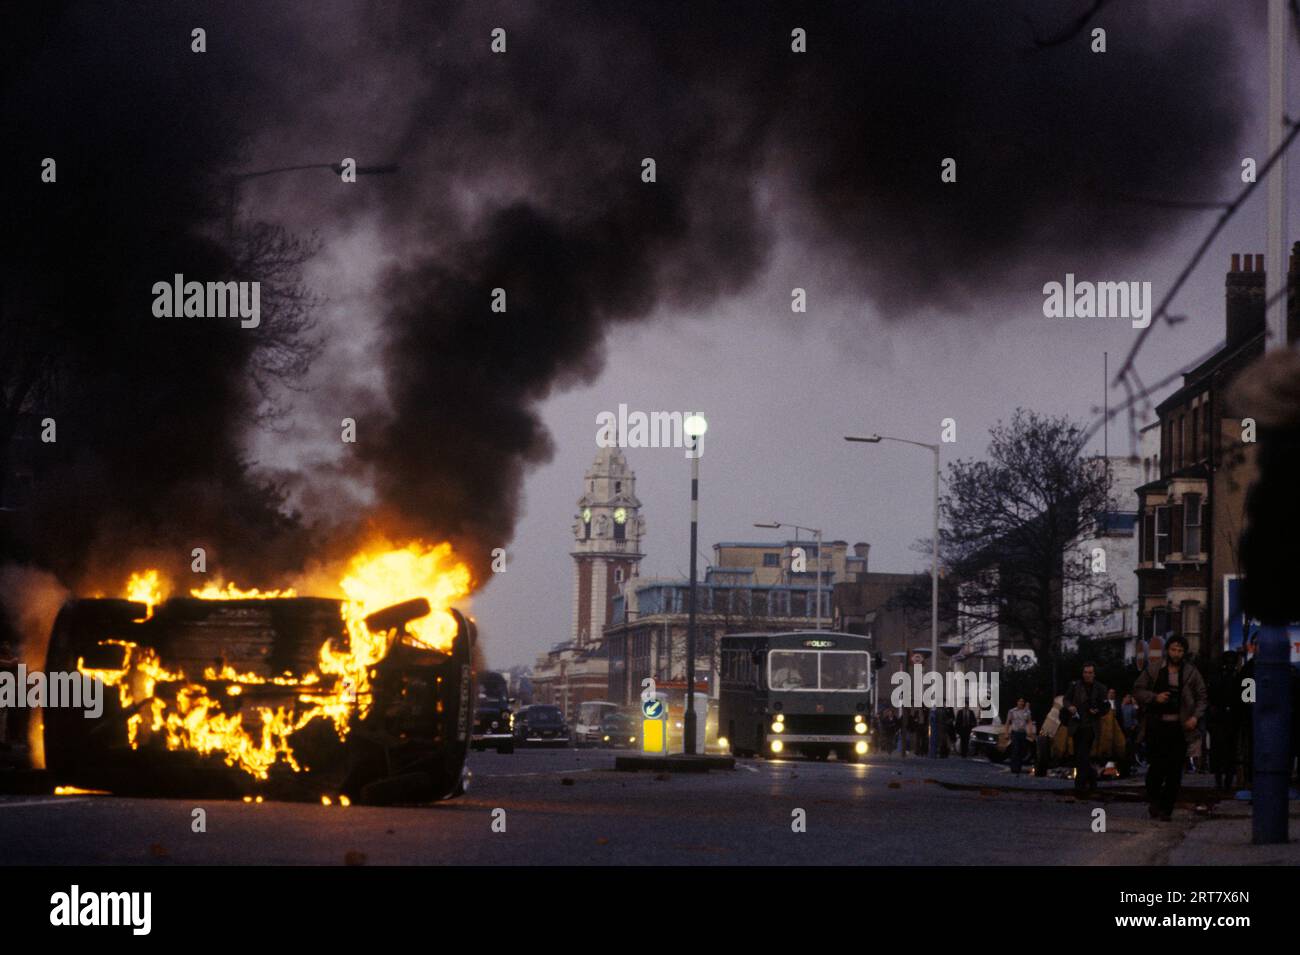 Brixton Riots 1981 UK.  Hijacked burning car set on fire by the rioters. Brixton town hall clock tower in background. Brixton South London Uk April 1980s  England HOMER SYKES. Stock Photo